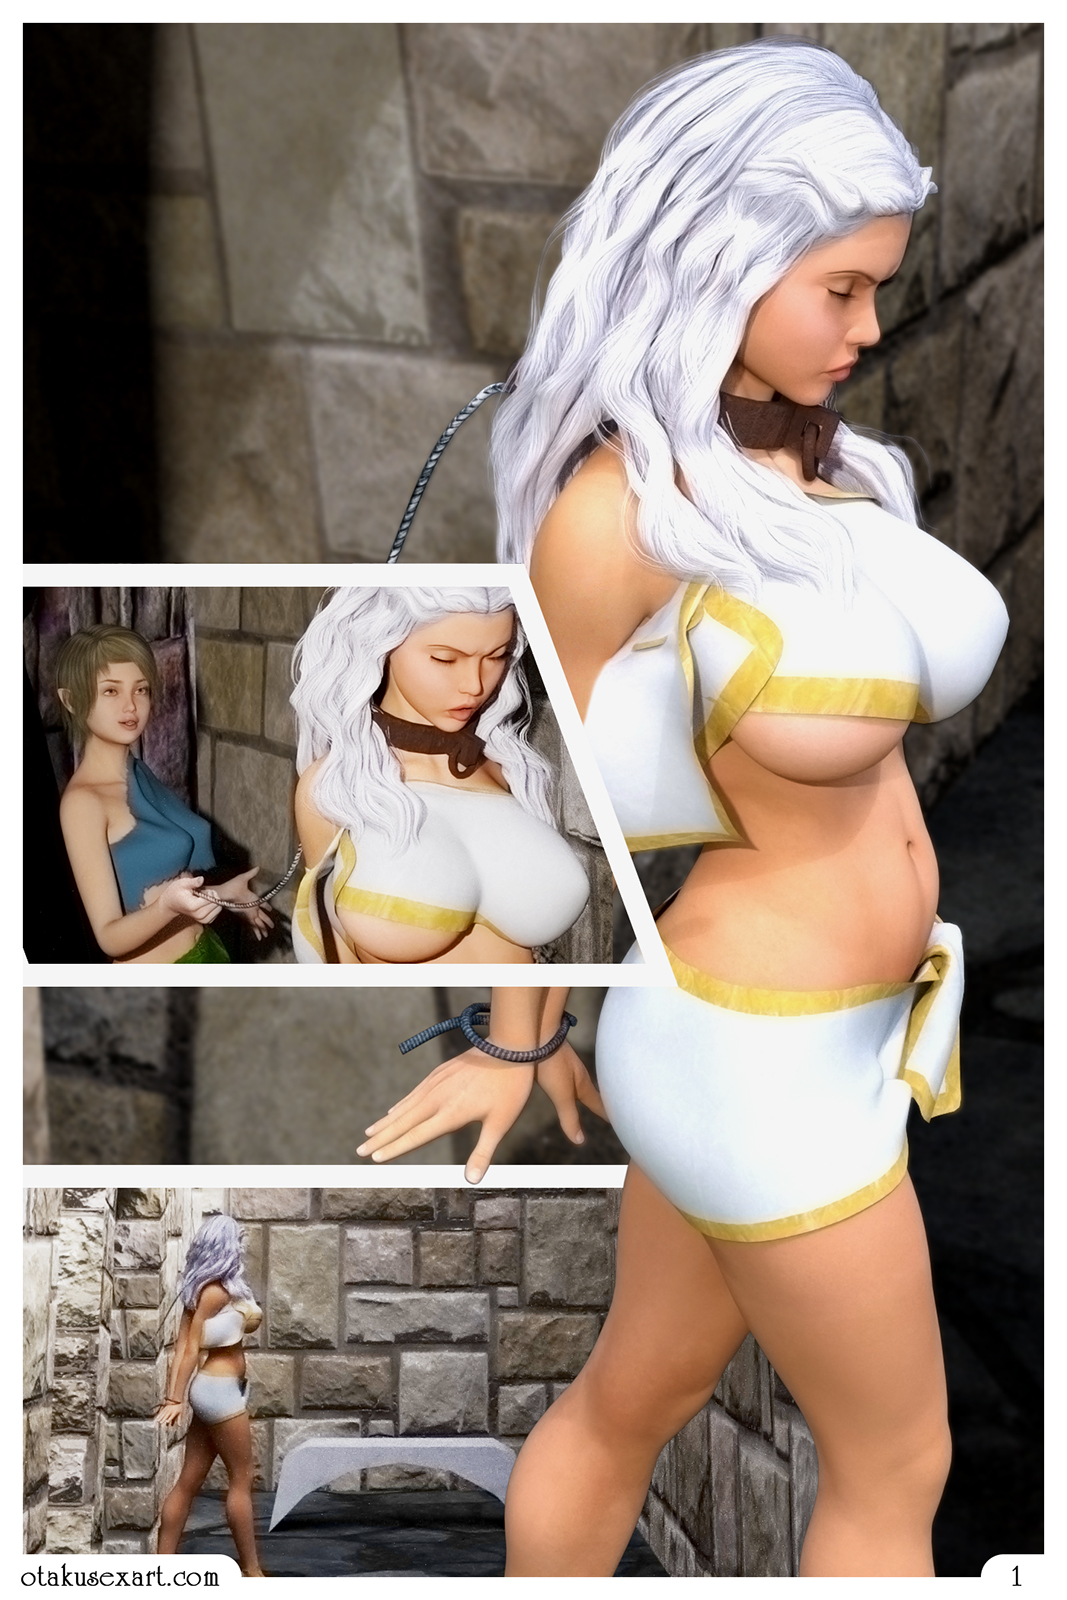 3d Hentai Porn Art - Looking for Trouble 2 â€“ Art Only â€“ page 1 | Otakusexart